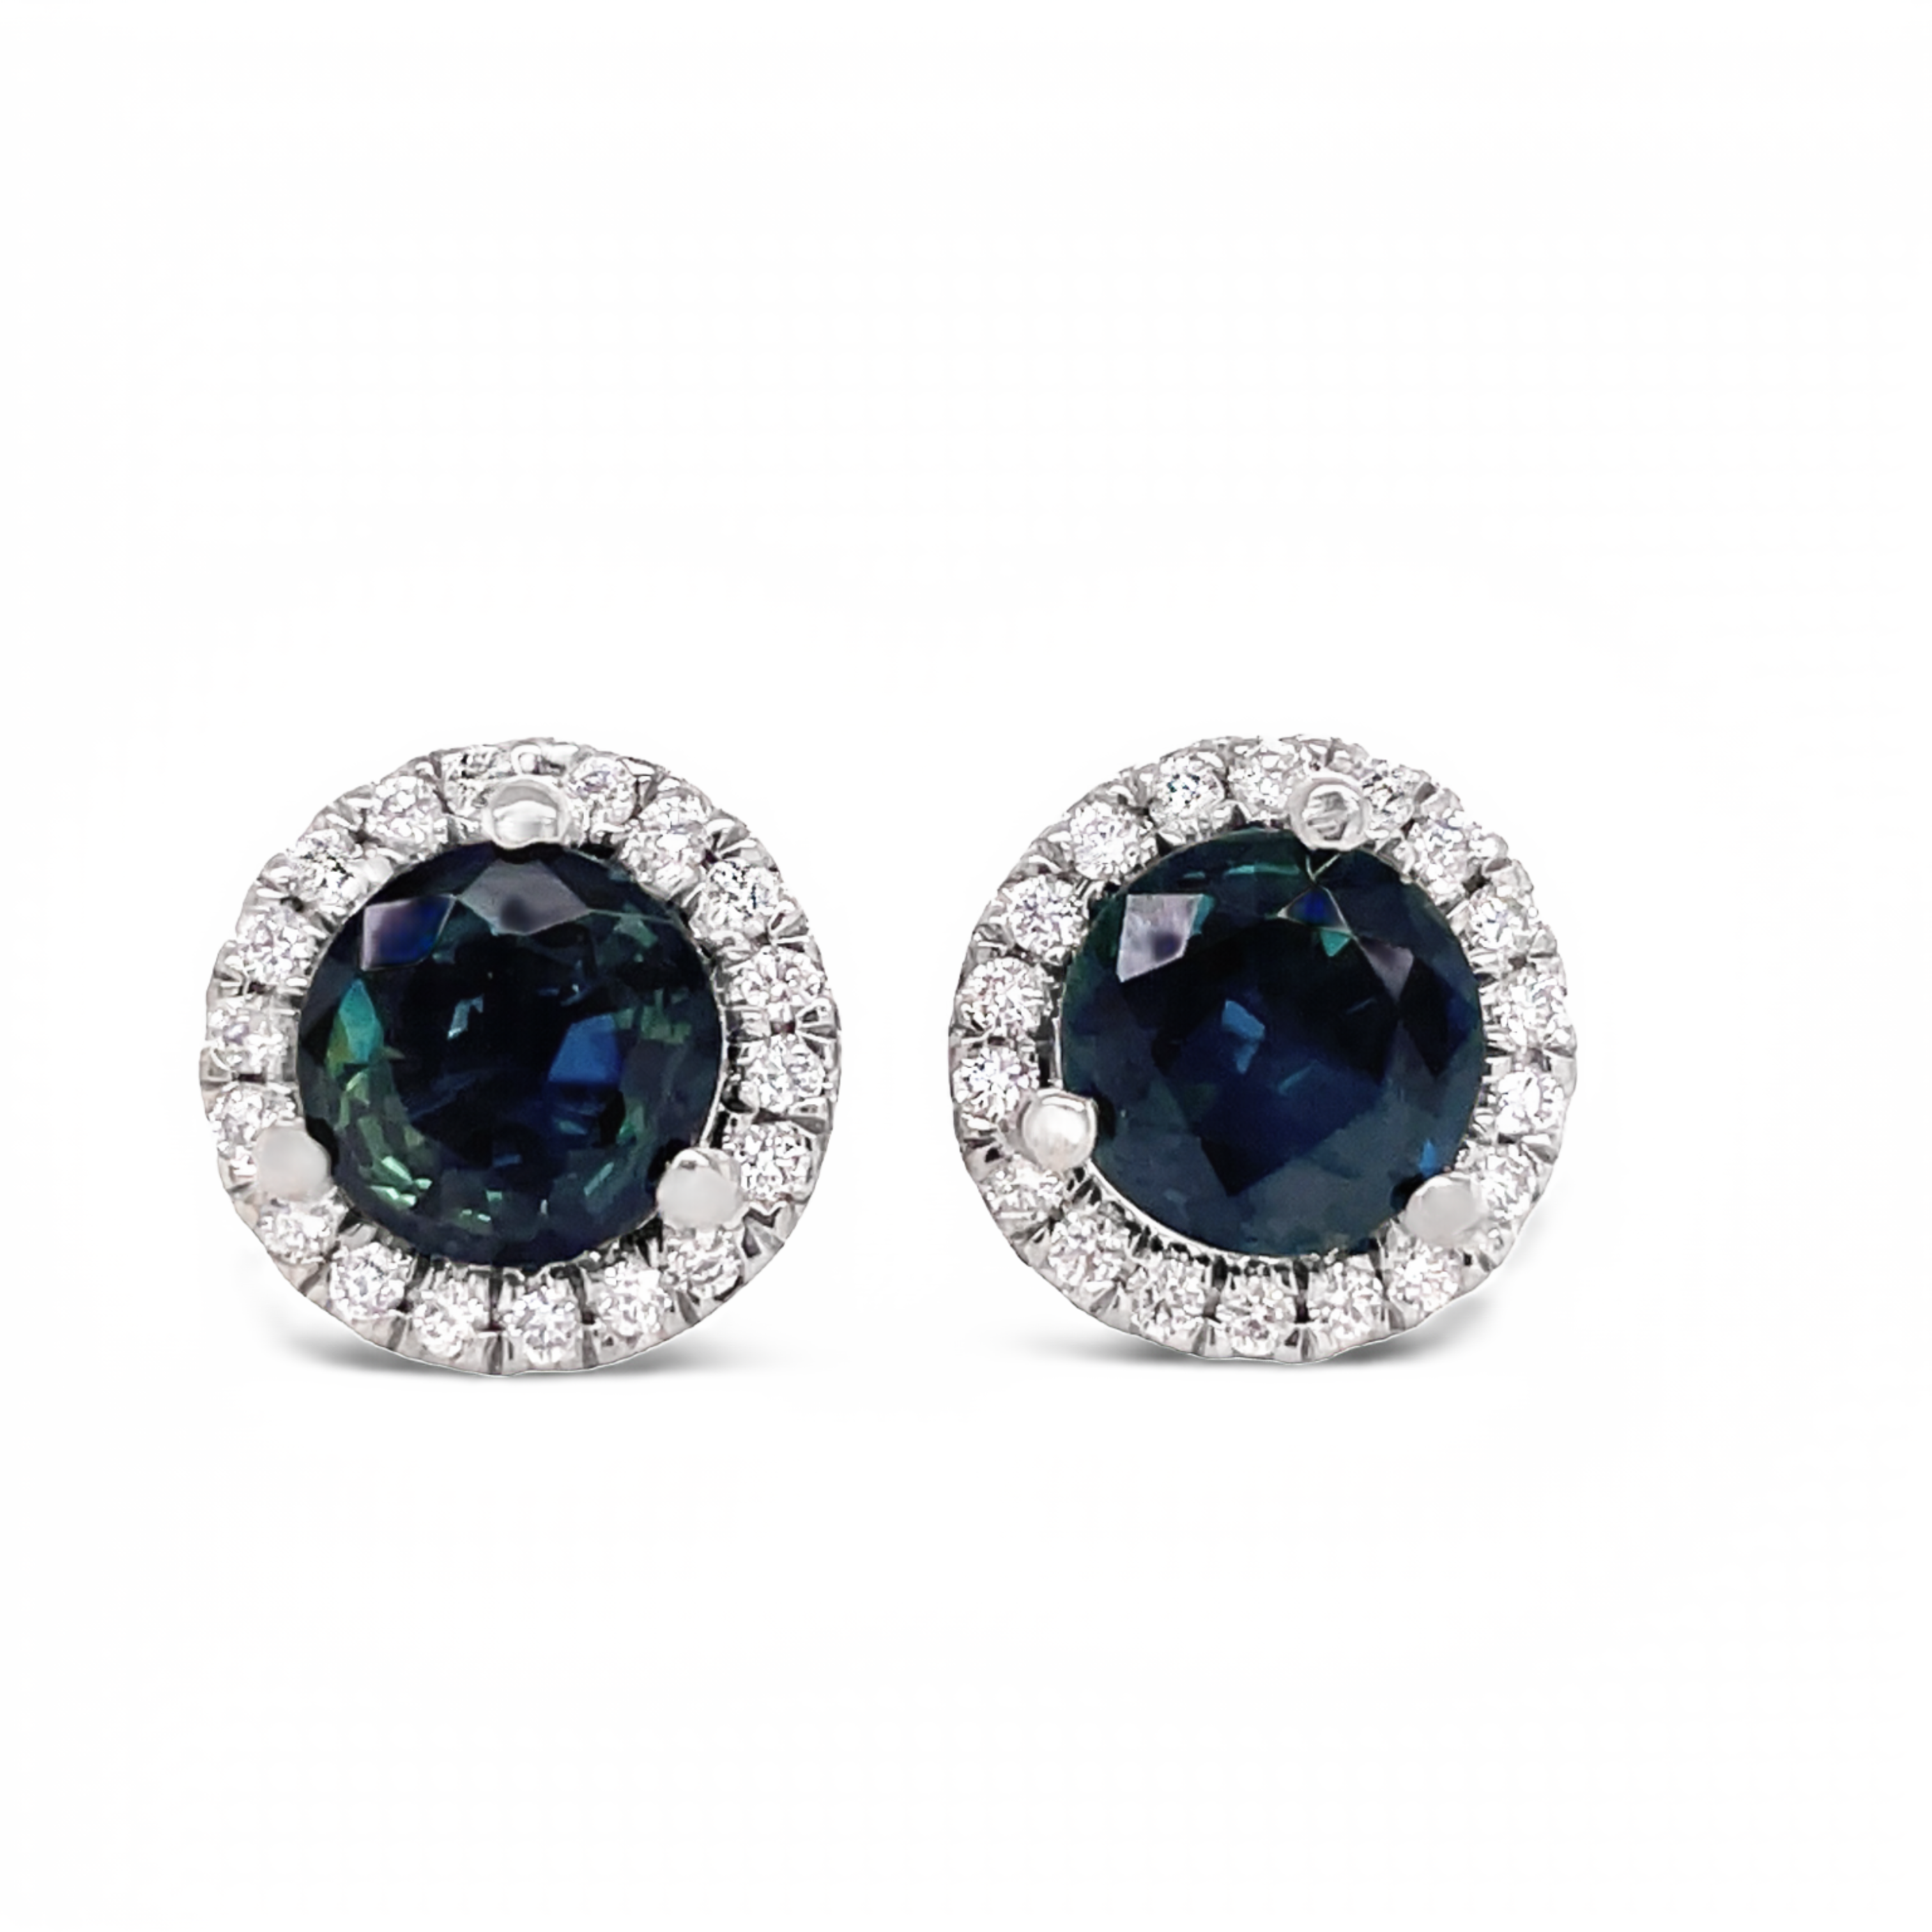 These beautiful medium blue sapphire and diamond stud earrings are crafted in 18k white gold. They feature 2.00 cts round faceted sapphires and 0.50 cts round diamonds for a unique, and elegant look.